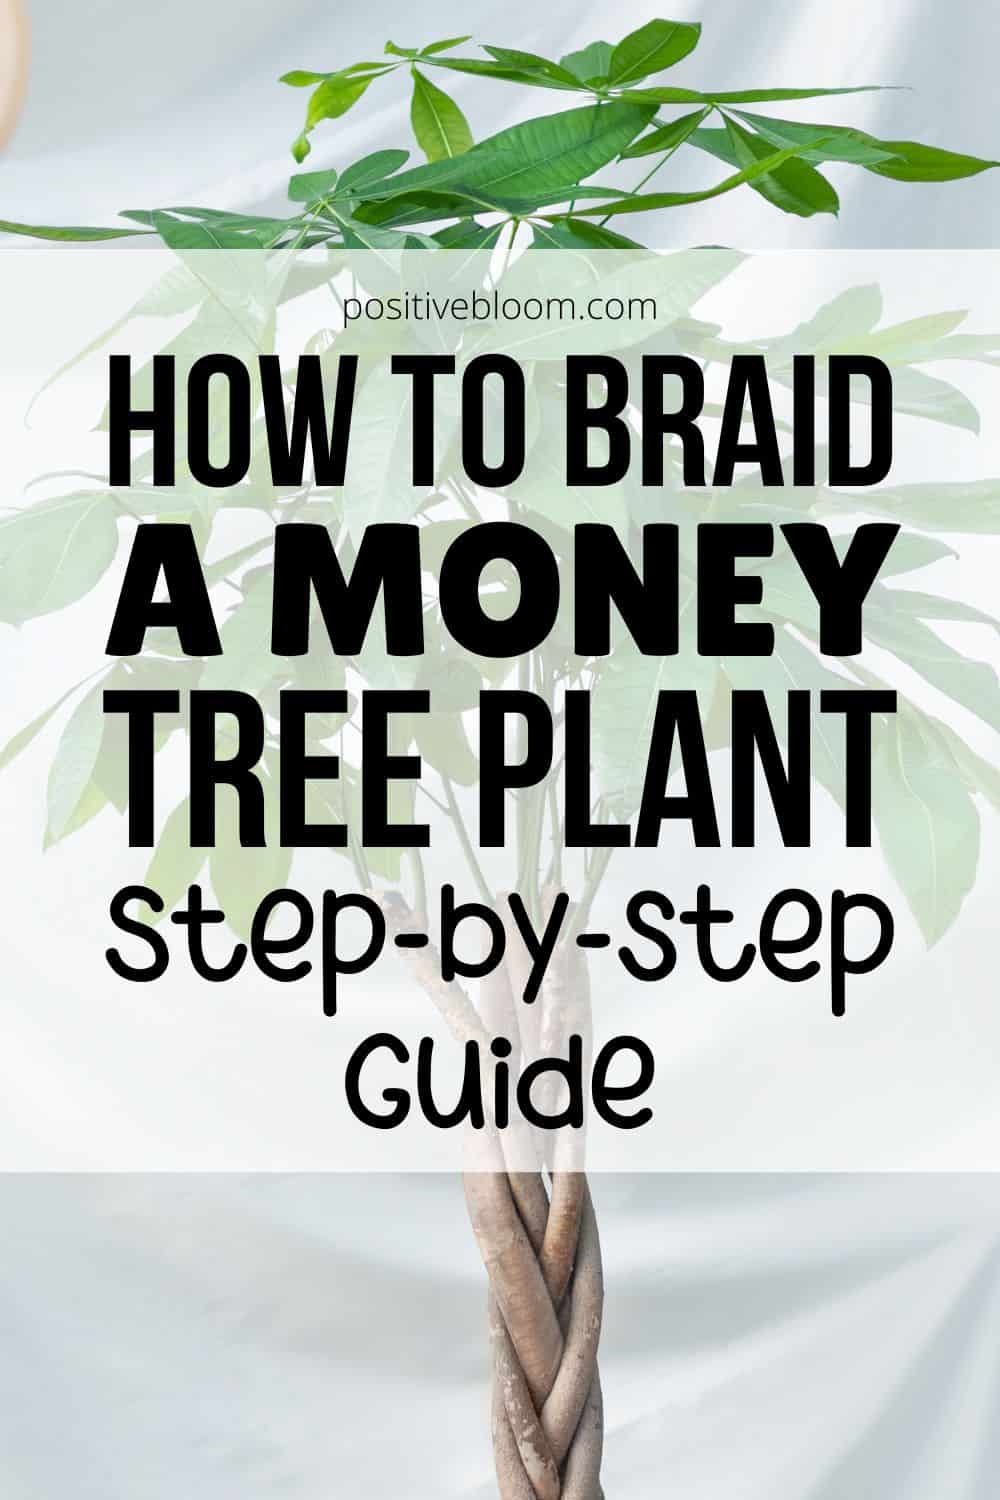 How To Braid A Money Tree Plant Step-by-step Guide Pinterest